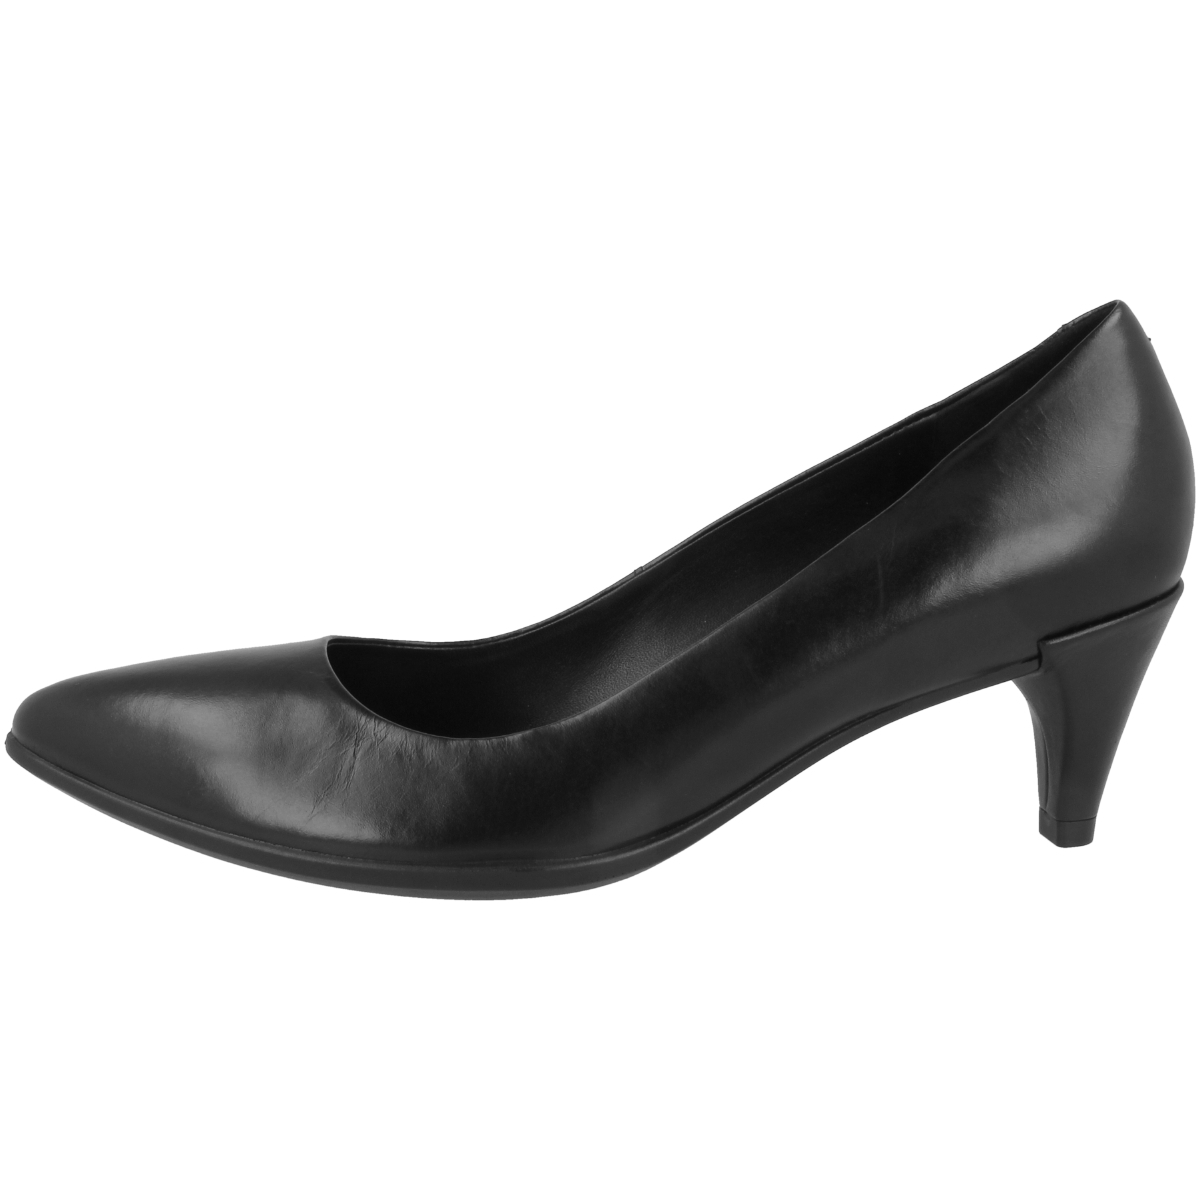 Ecco Shape 45 Pointy Pumps